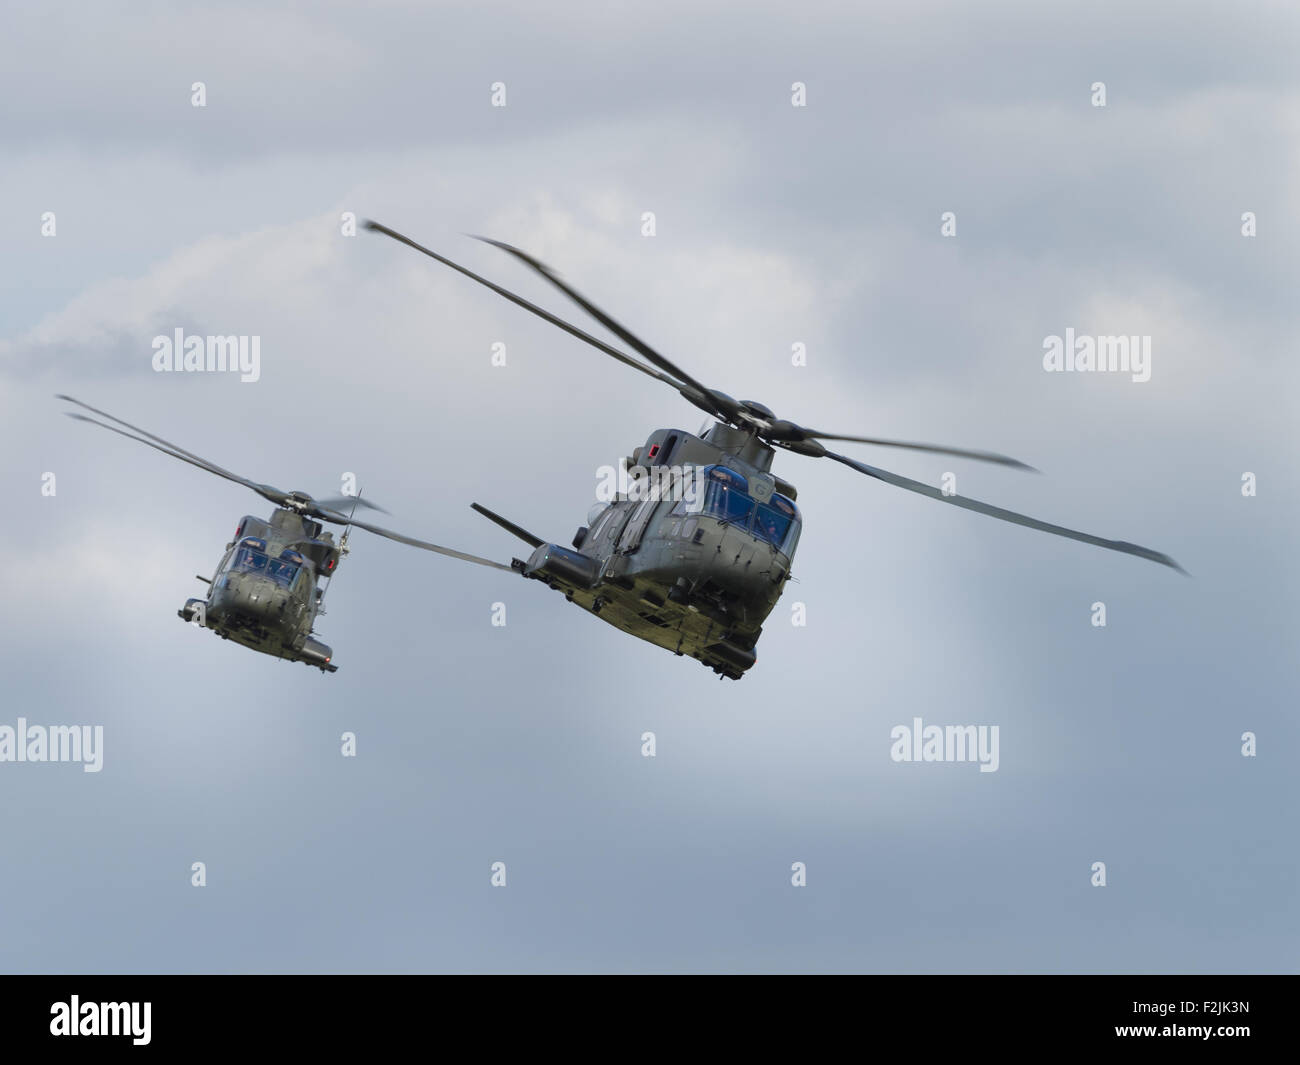 Yeovilton, UK - 11th July 2015: Royal Navy Merlin helicopters flying at Yeovilton Air Day. Stock Photo